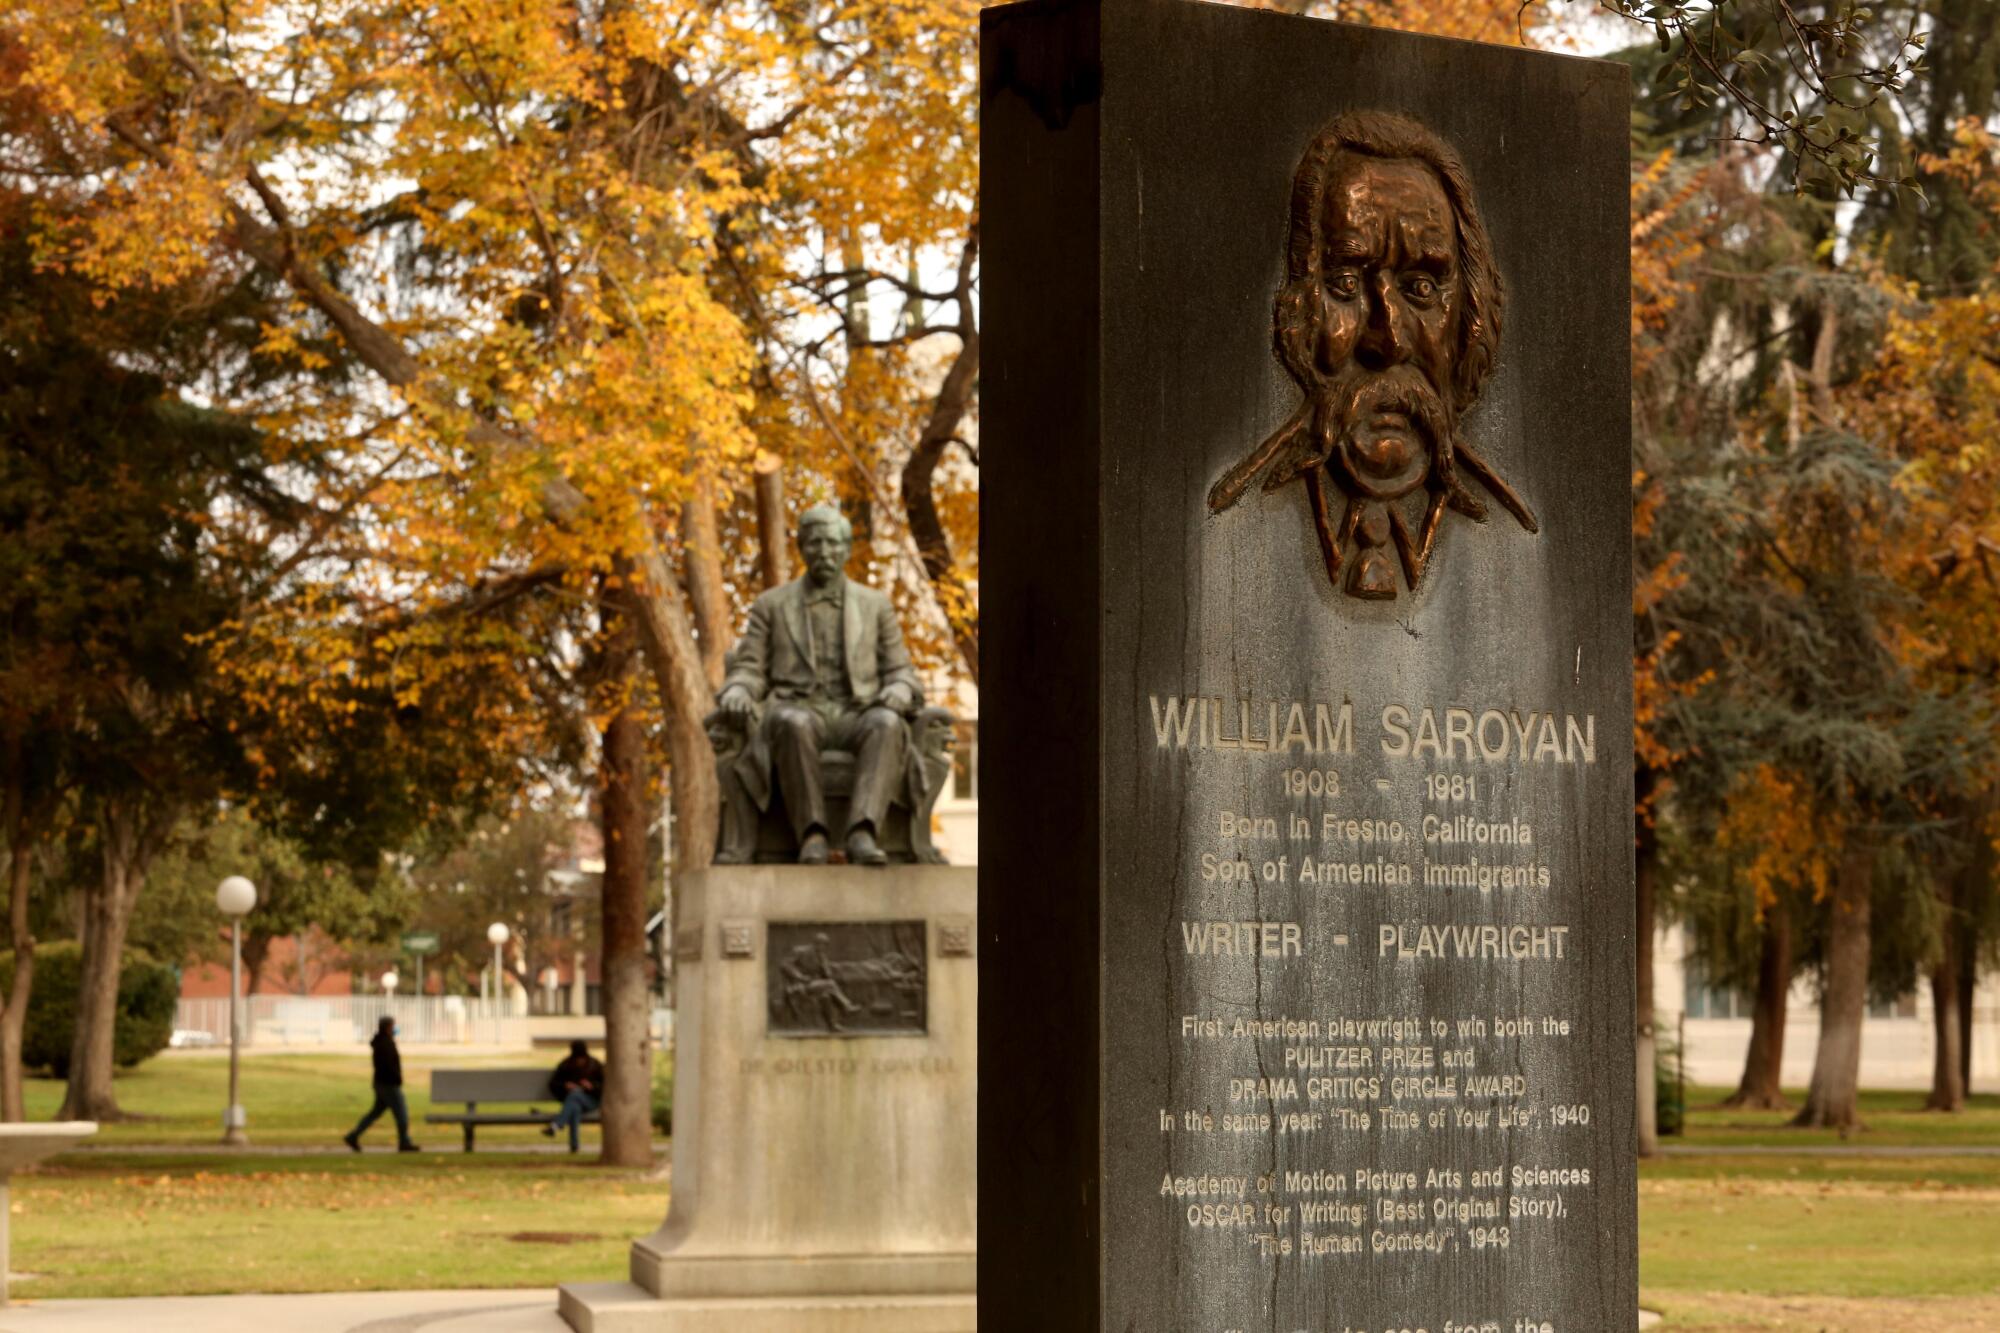  The William Saroyan Monument and Dedicatory Plaque stands in Courthouse Park in downtown Fresno